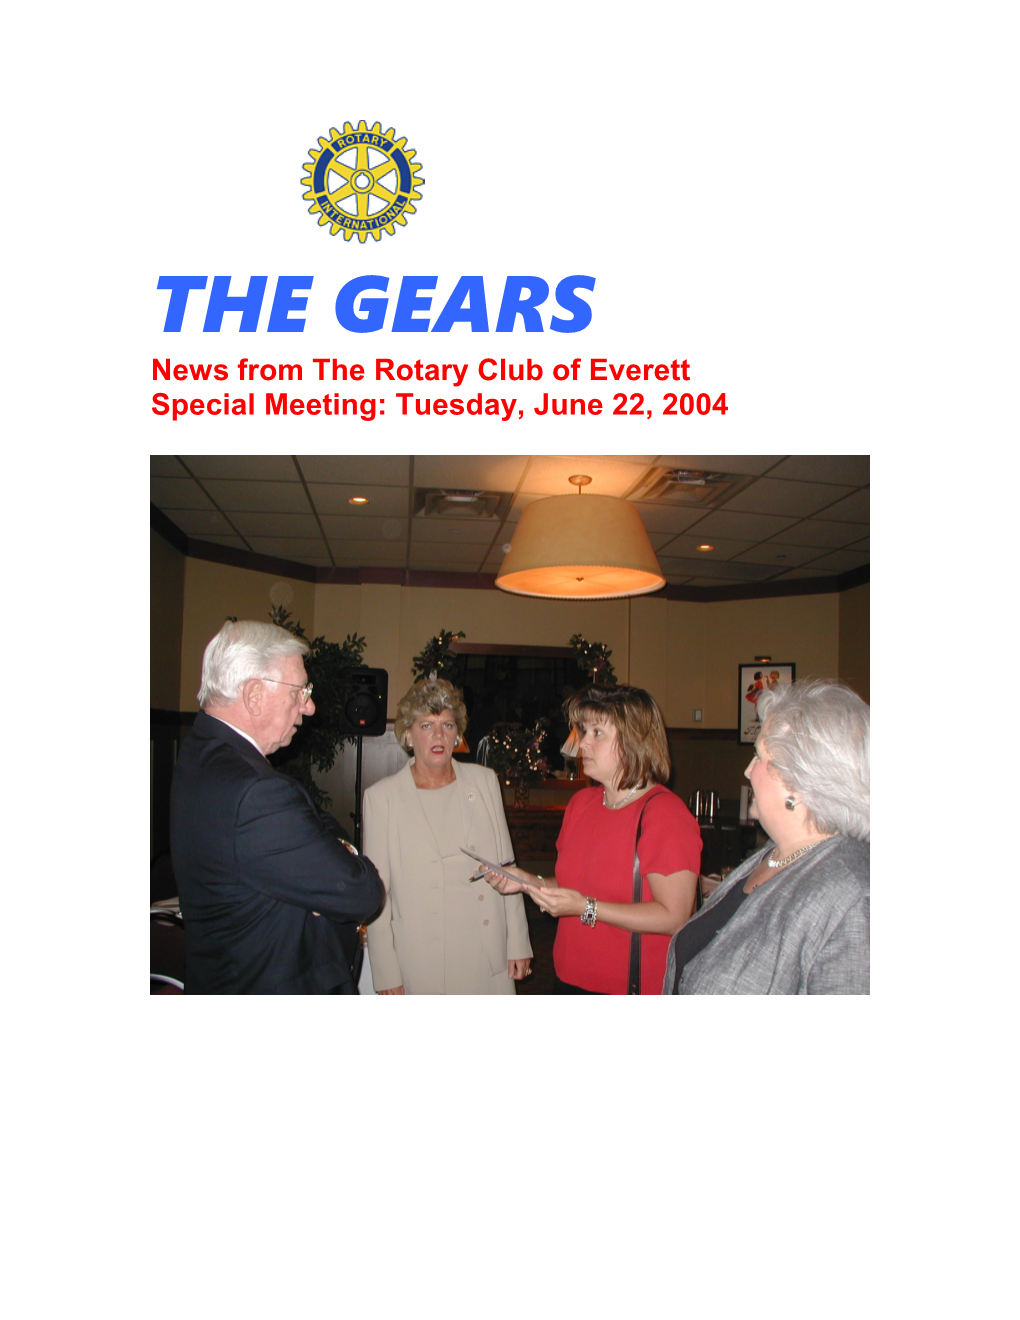 News from the Rotary Club of Everett